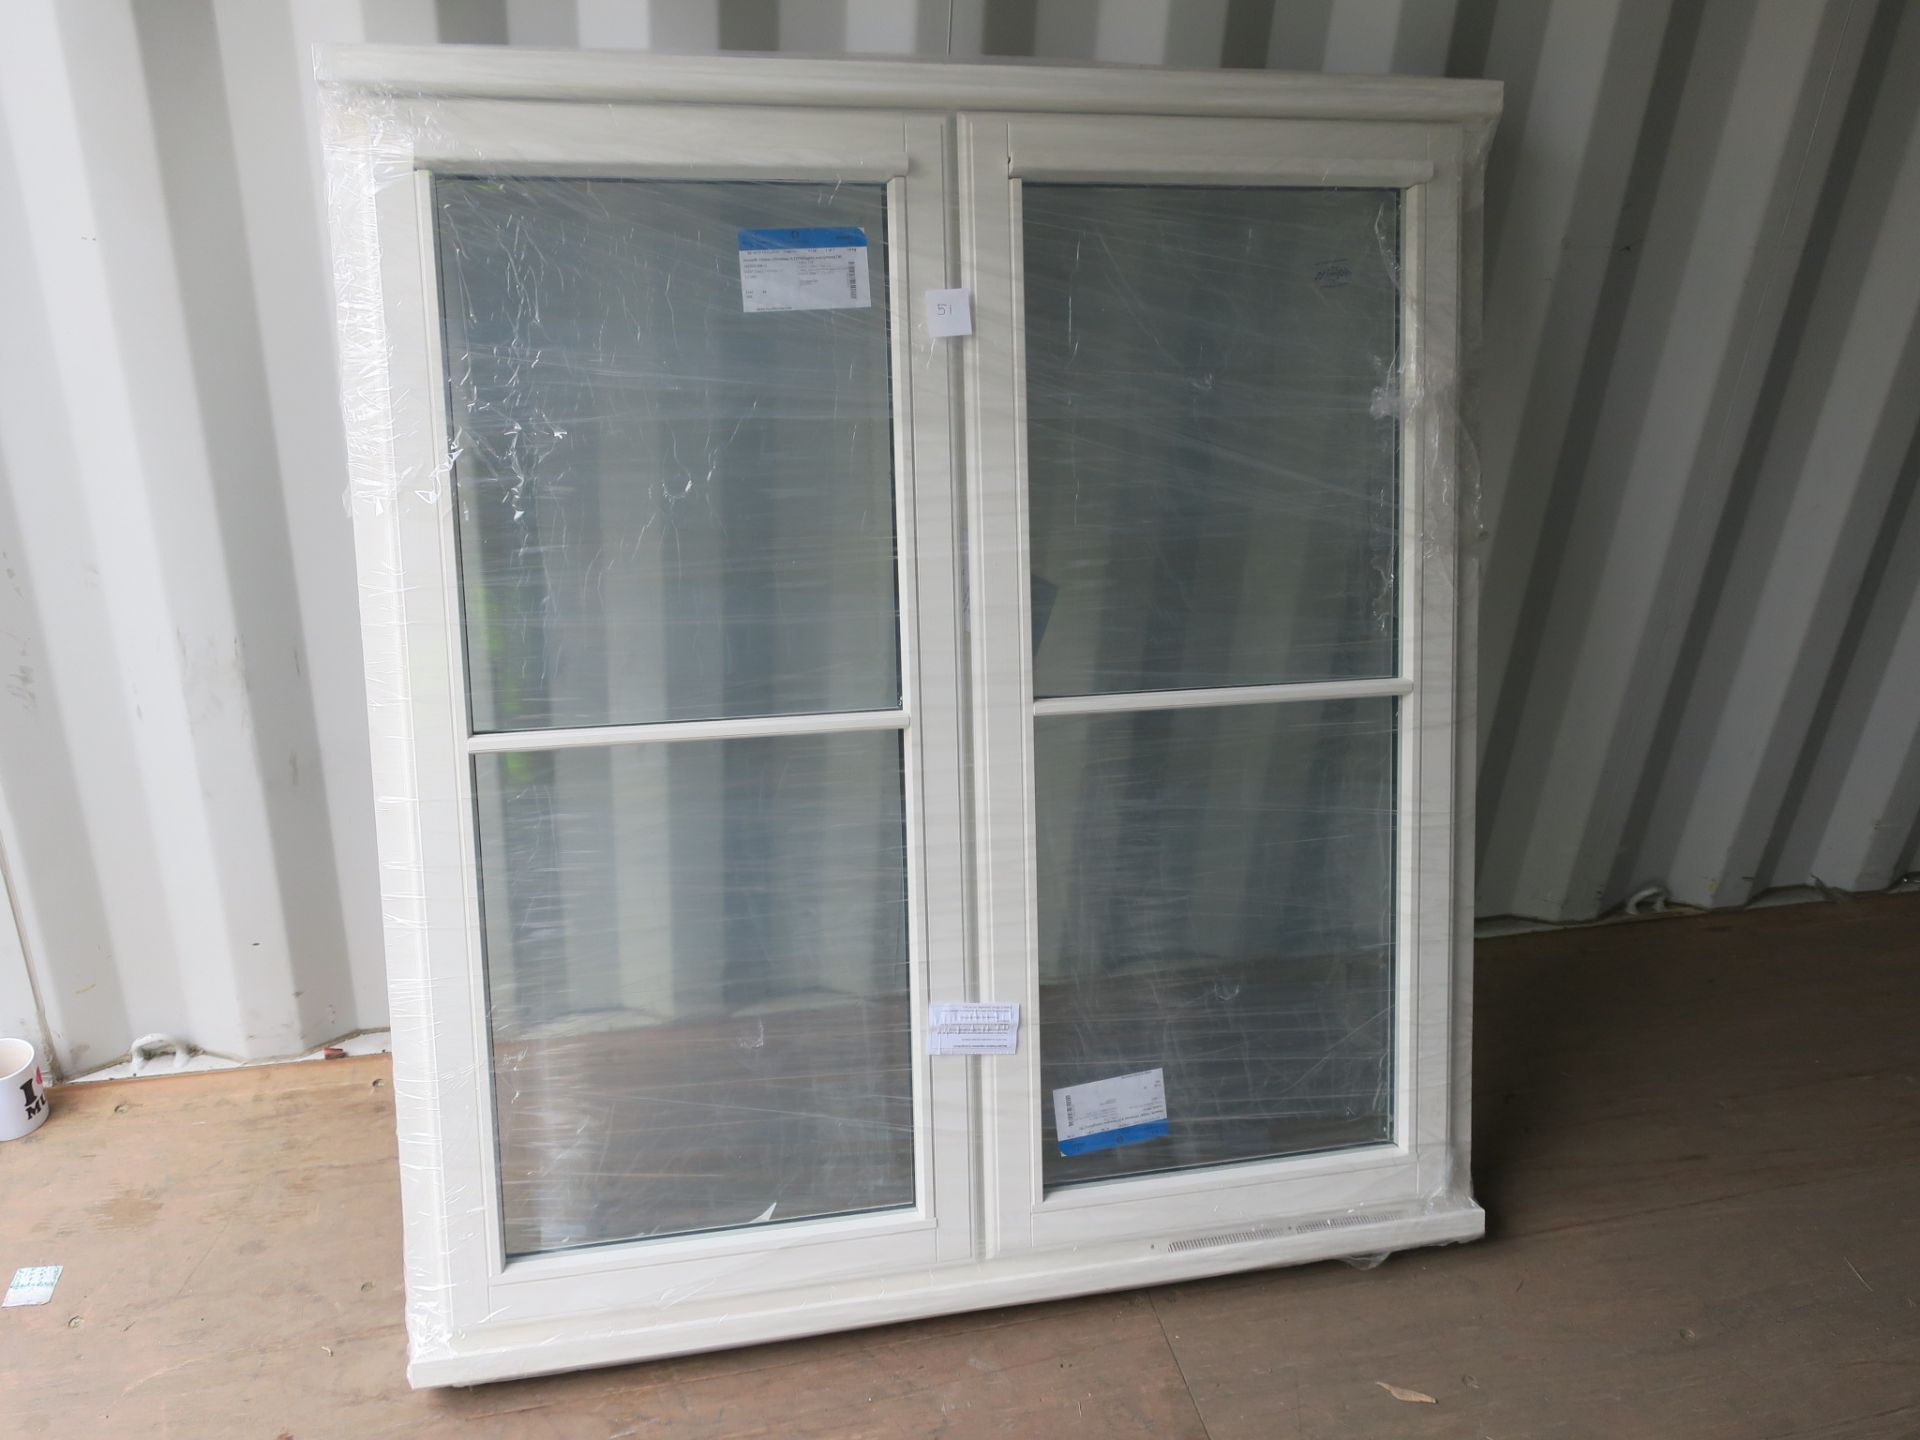 * New Clear Glass Window 1247 x 1350mm. A new clear glass window by Howarth Windows and Doors Ltd